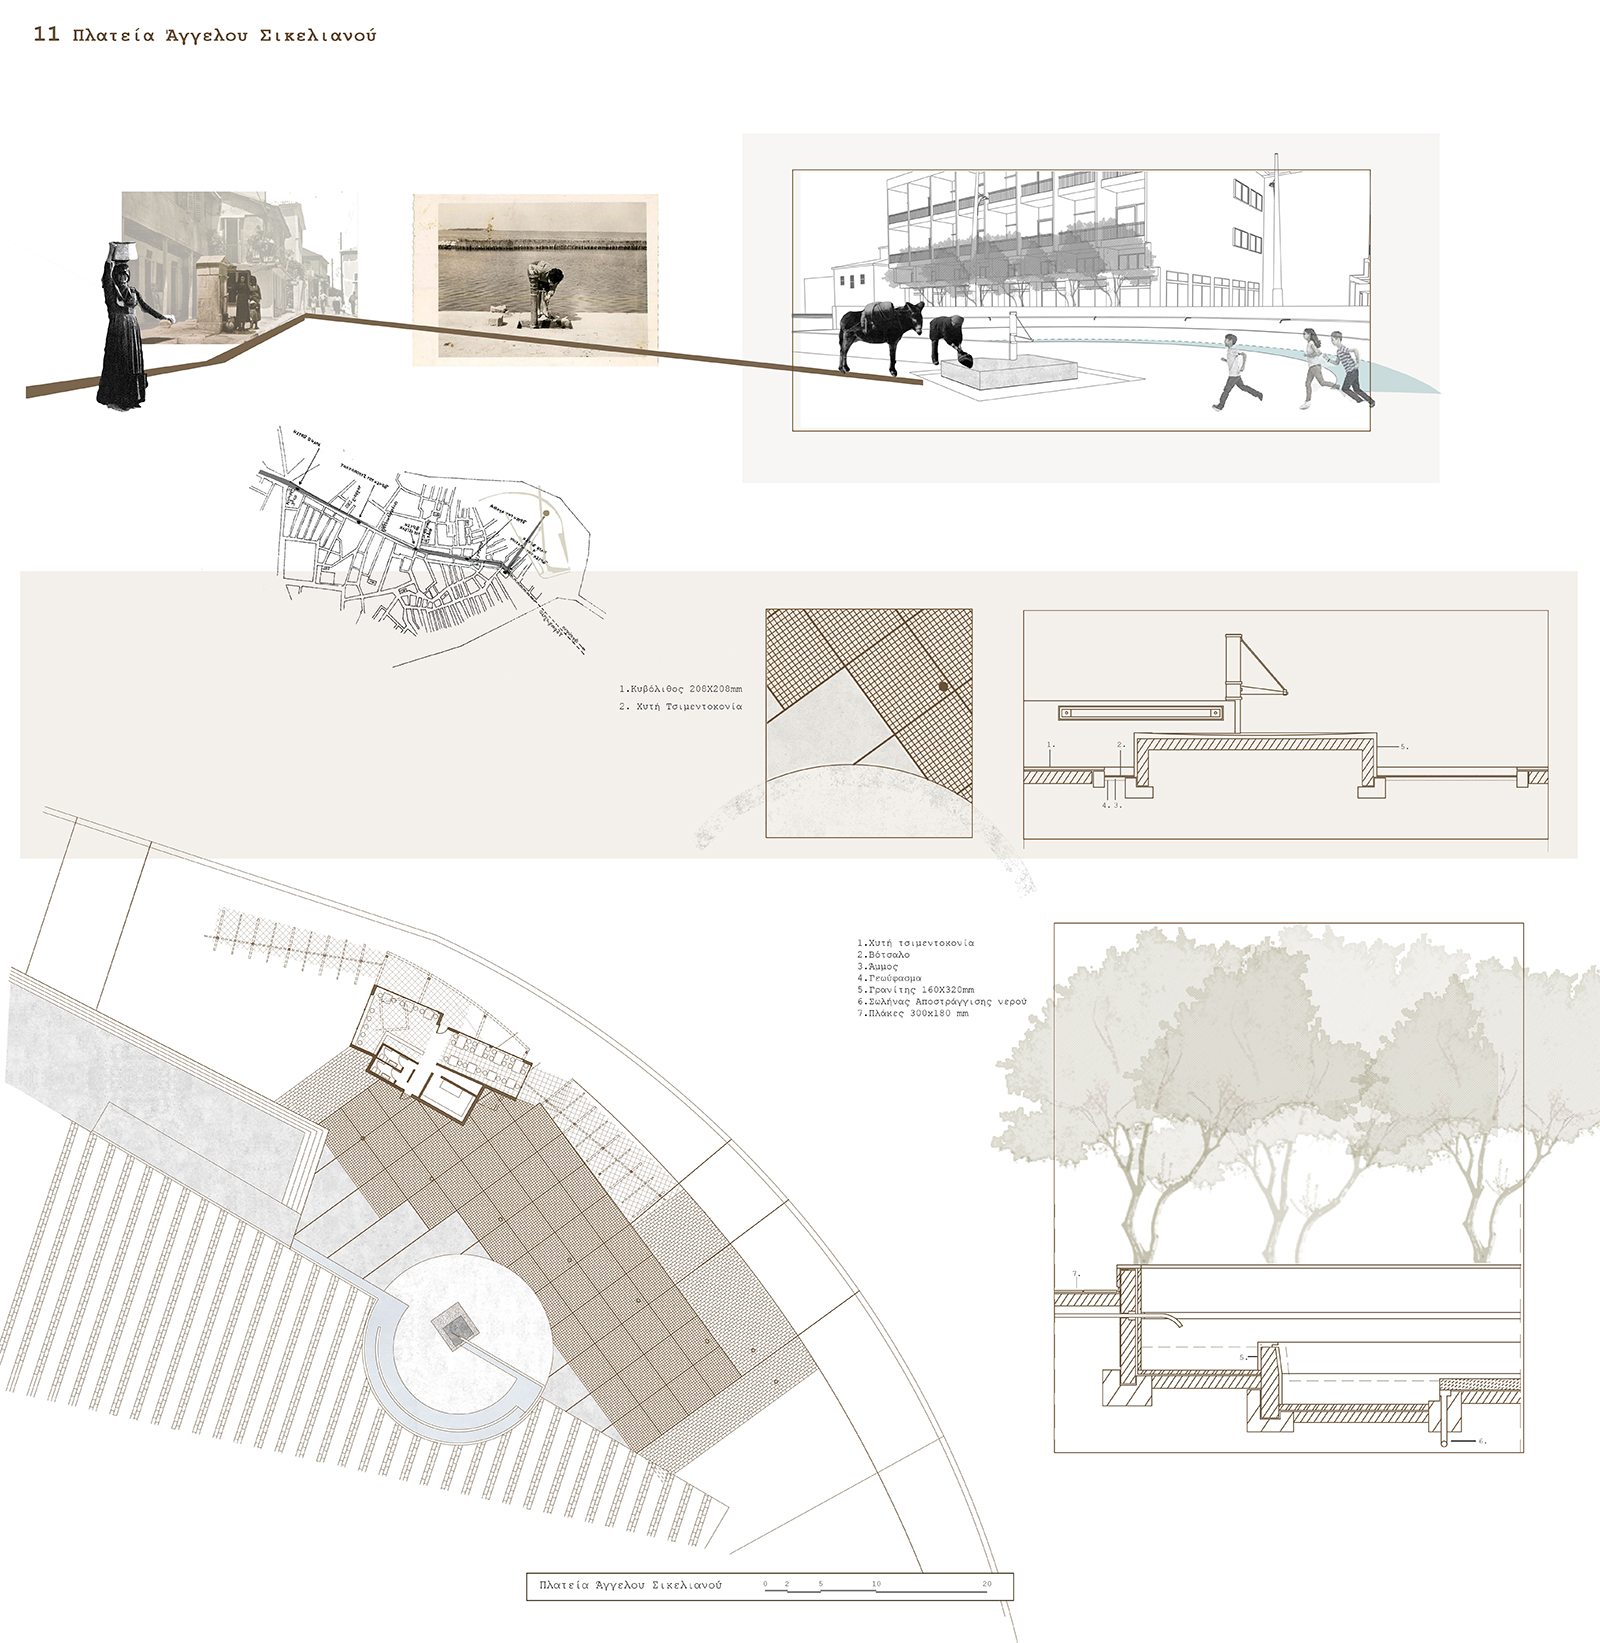 Archisearch Lefkada passages. Landscaping on the coastal northeastern front of Lefkada and restoration/reuse of the old TAOL winery | Diploma thesis by Alexandra Vasileiou, Katerina Voukelatou